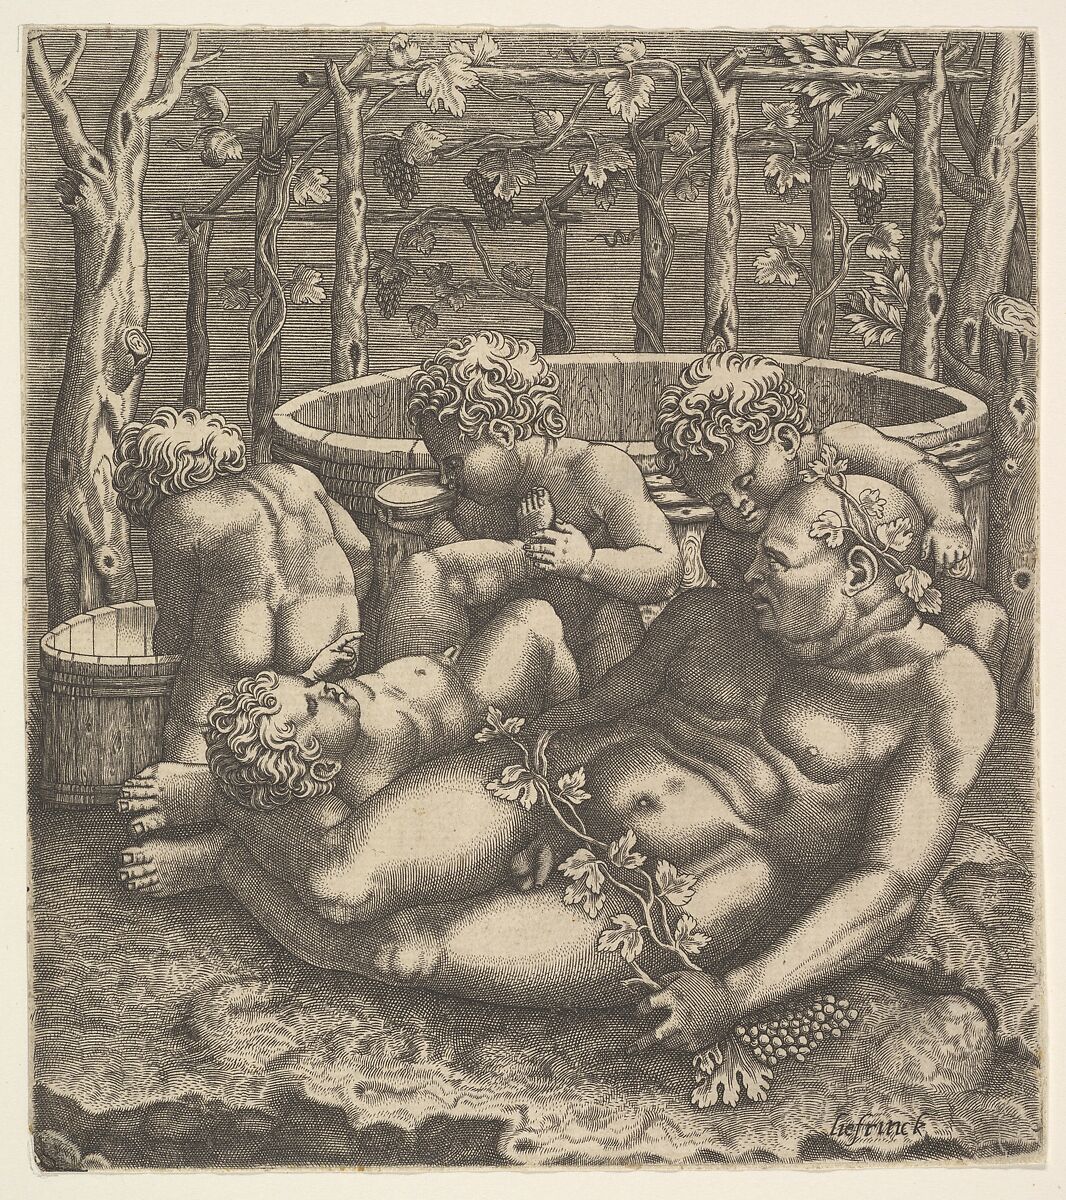 Silenus reclining before wine vats, he grasps a grapevine and is surrounded by four nude children, Attributed to Philippe de Soye (Netherlandish, born 1538, active Rome, 1566–72), Engraving 